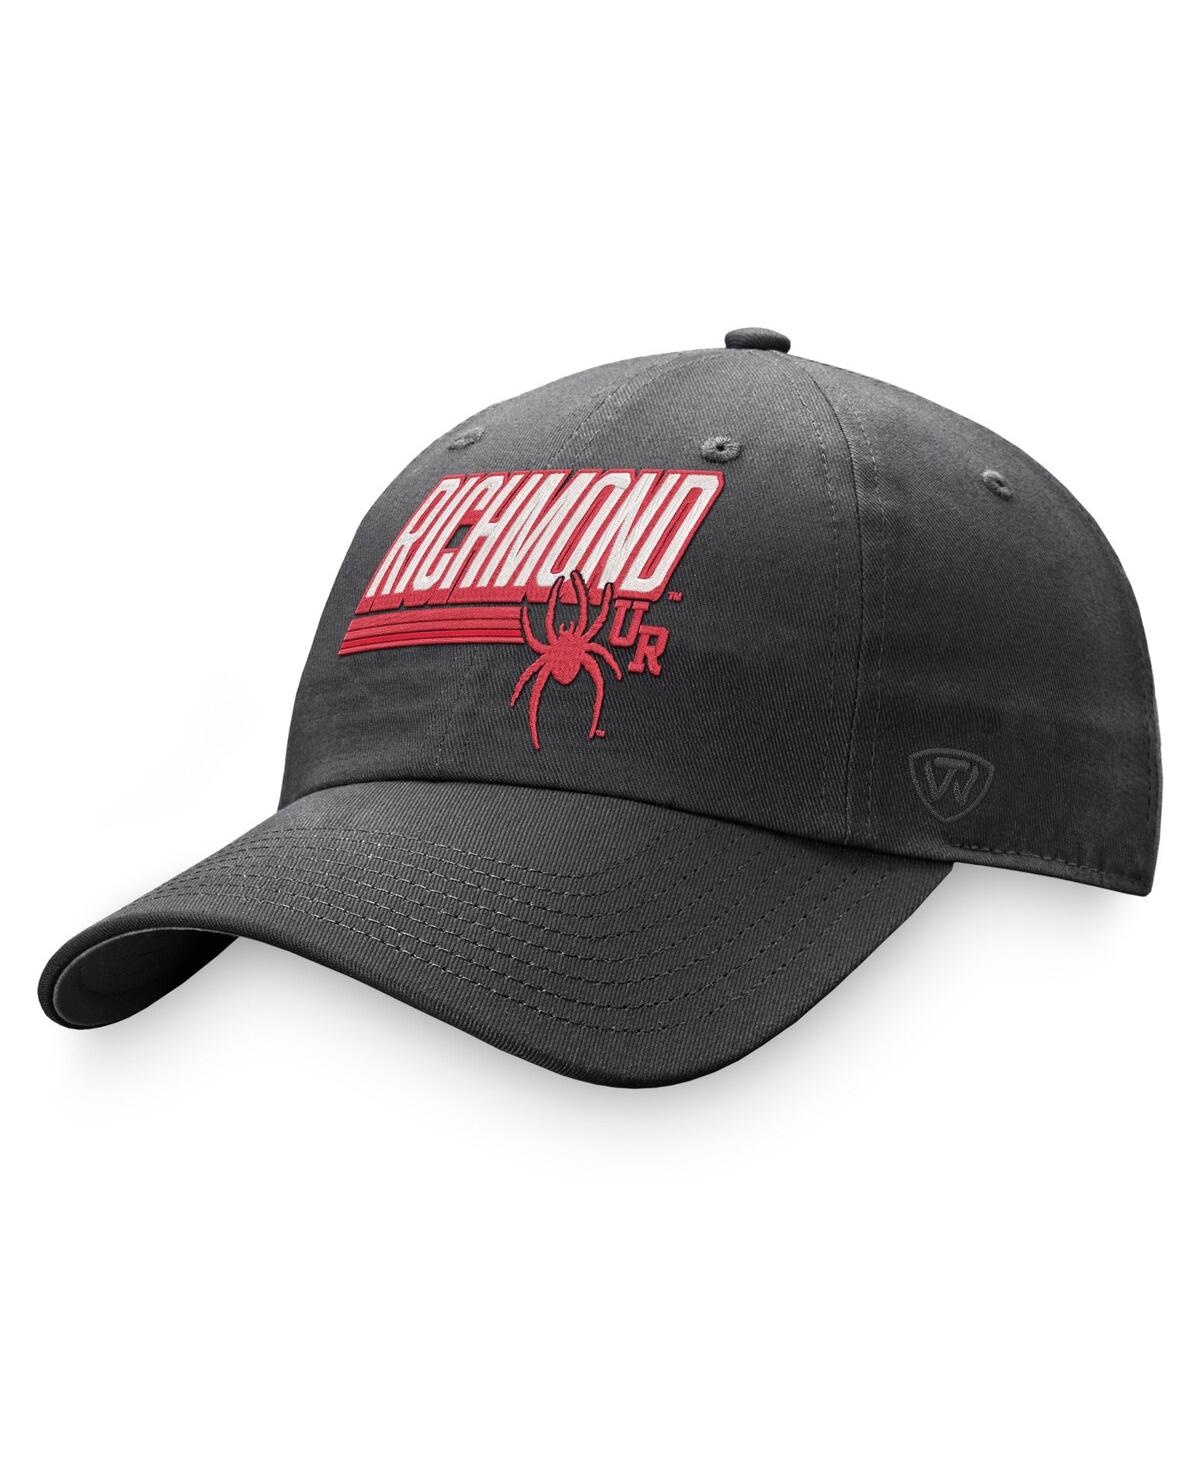 Men's Top of the World Charcoal Richmond Spiders Slice Adjustable Hat - Charcoal